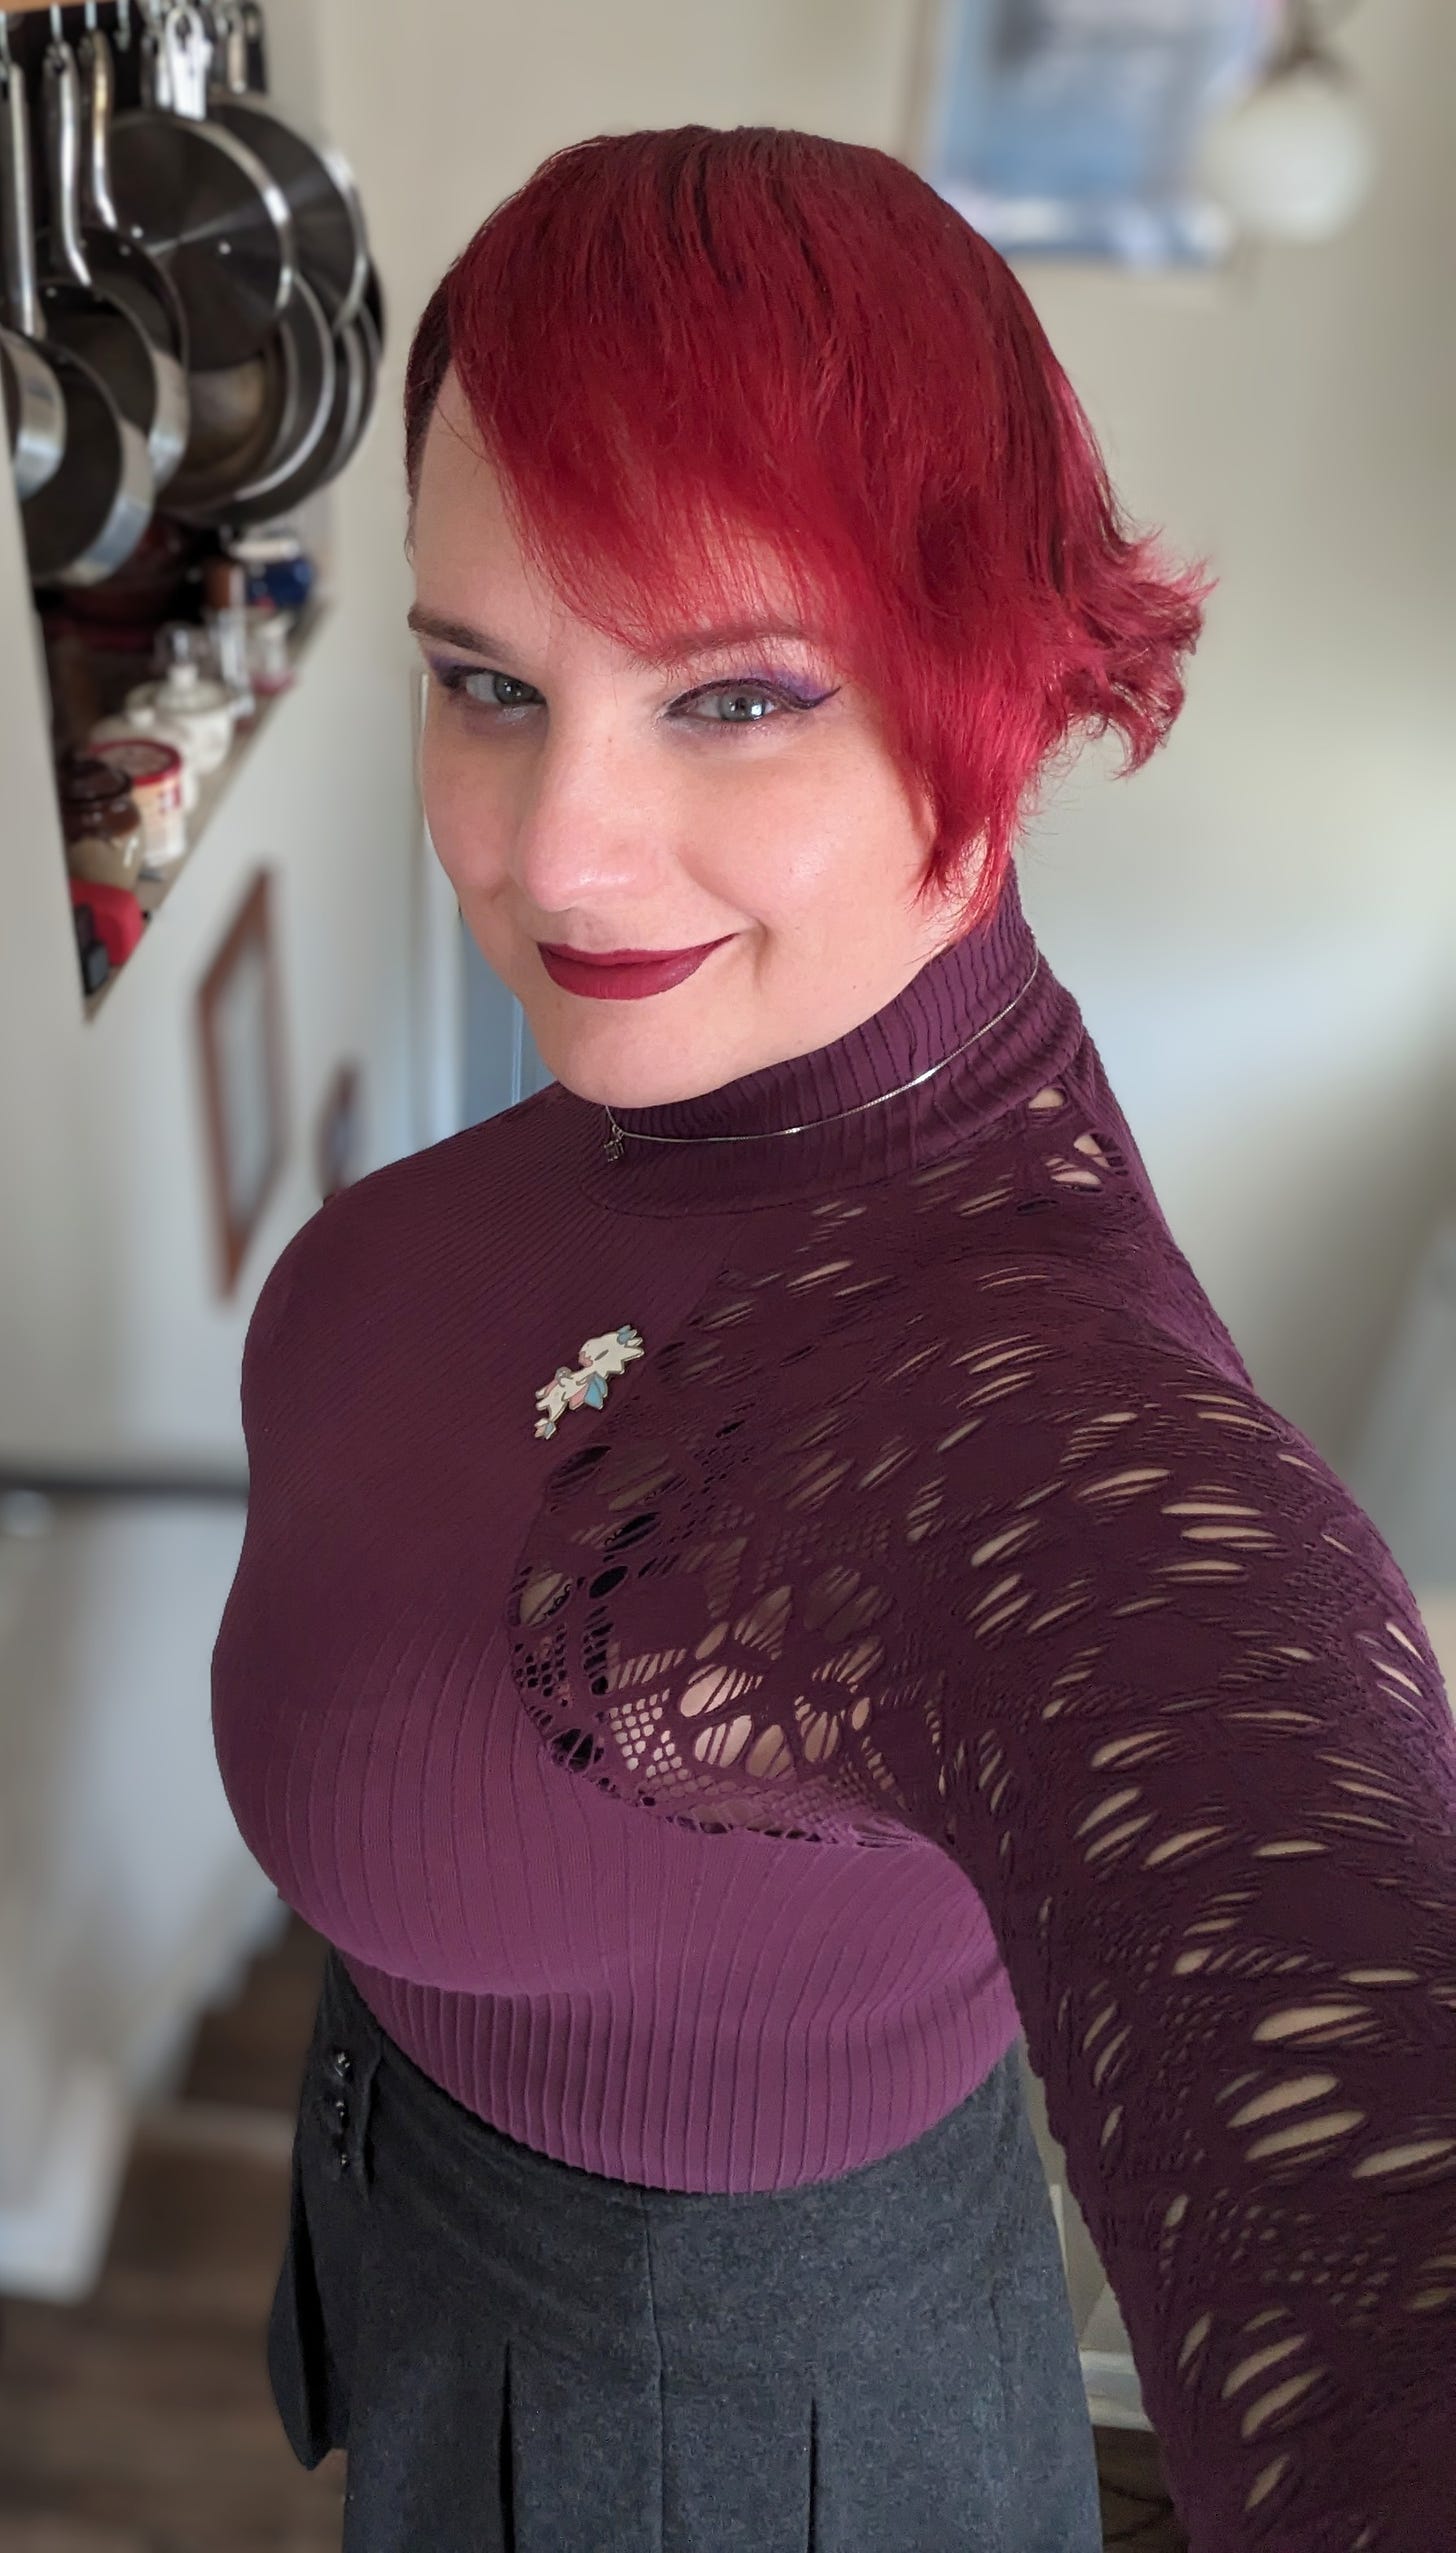 A redhead with a full head of hair, a clear face, and full bosom grins at the camera.